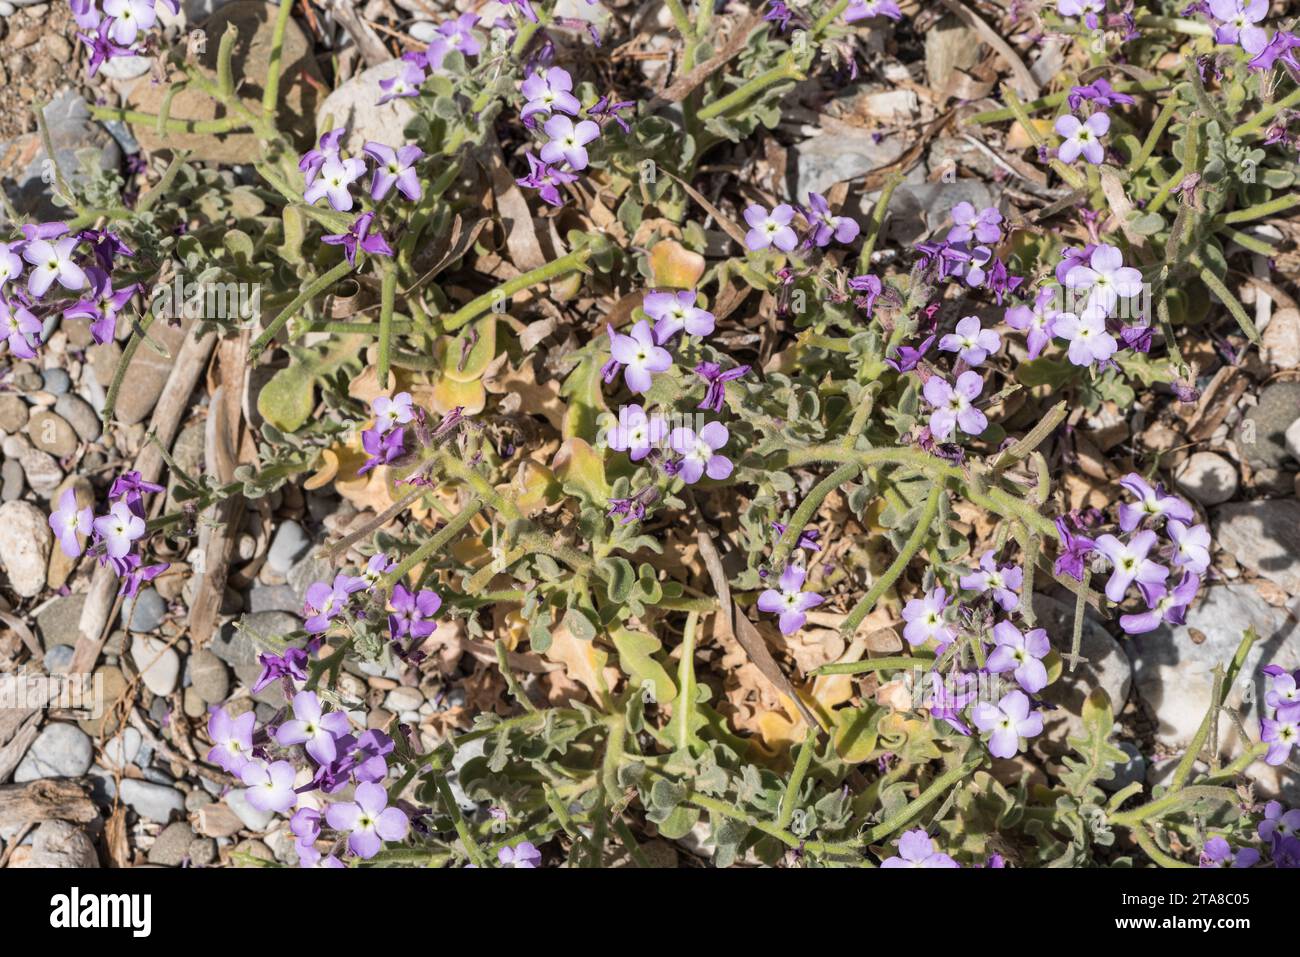 Flowers of the halophyte Three-horned Stock (Matthiola tricuspidata) in Turkey Stock Photo